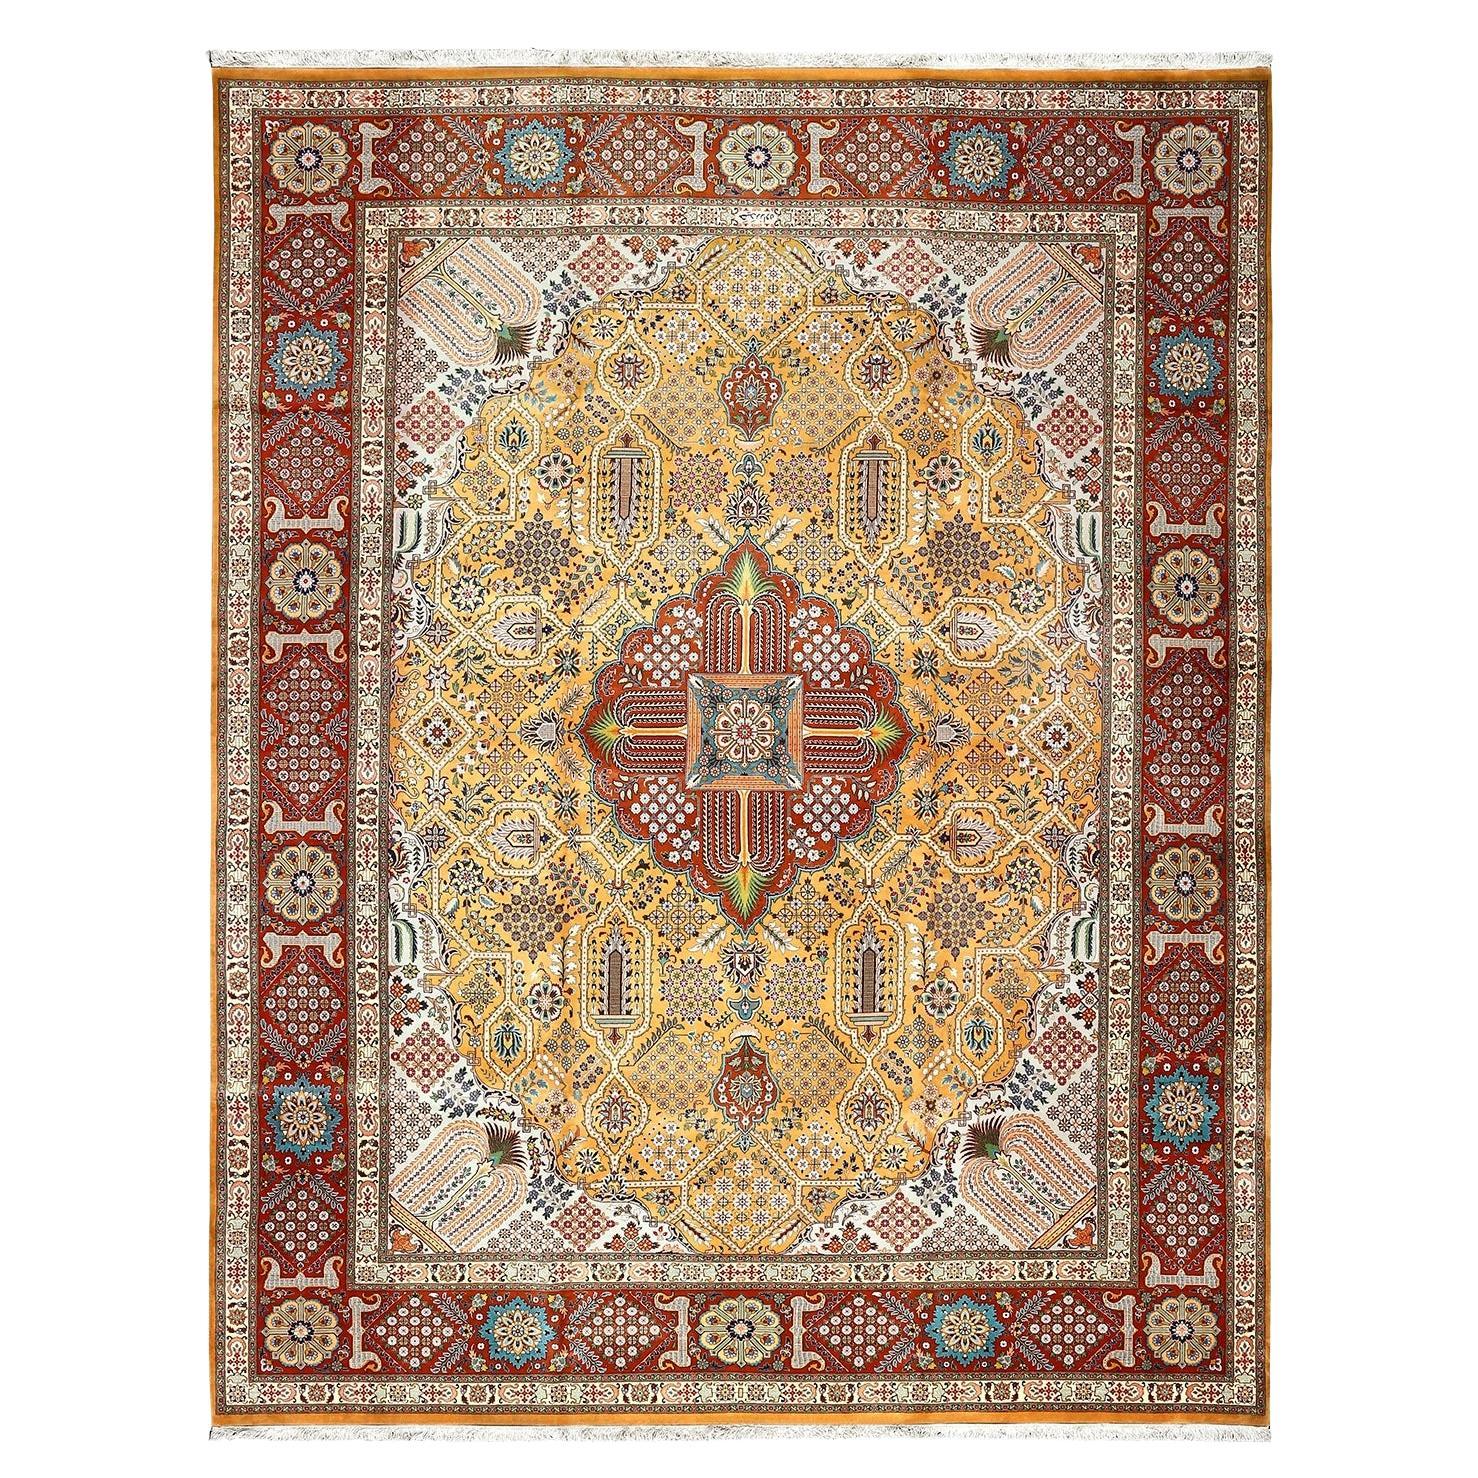 Damoka Collection Vintage Tabriz Heydarzadeh - Size: 12 ft 8 in x 10 ft 1 in For Sale